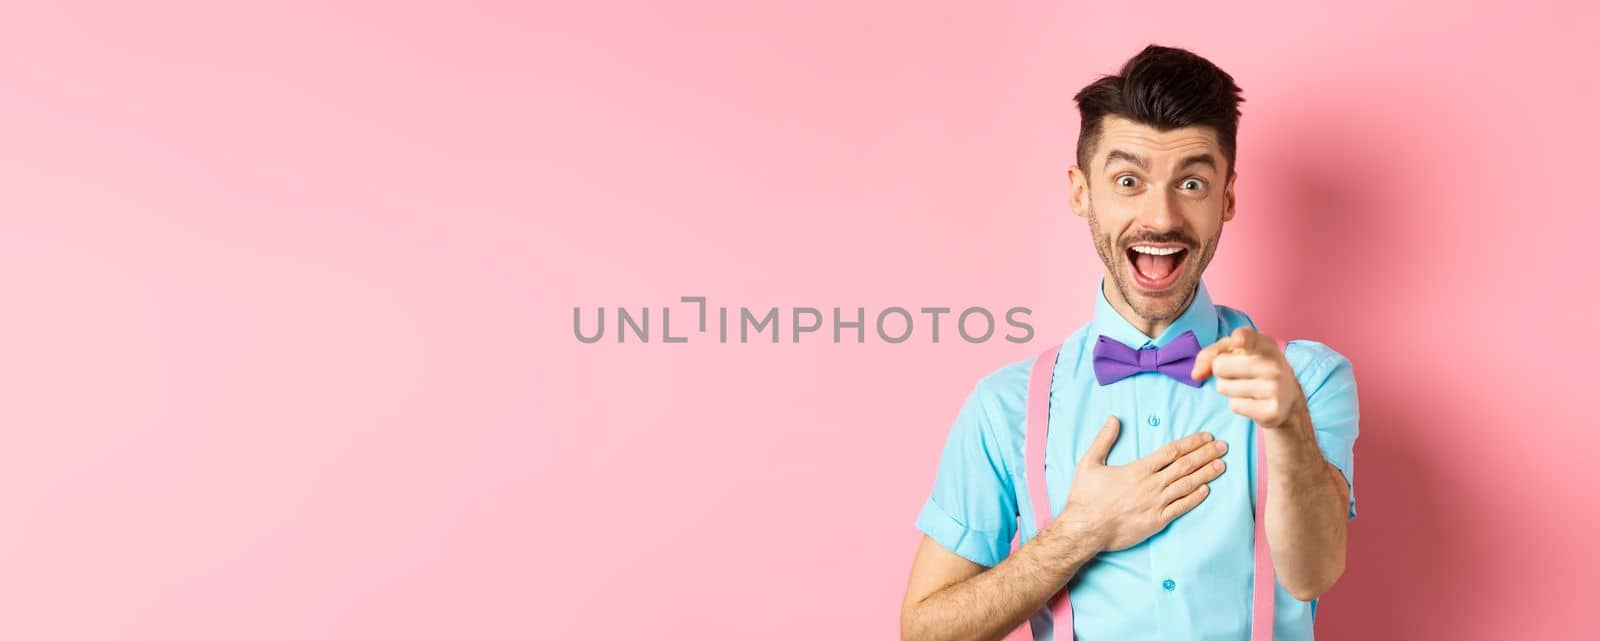 Funny guy laughing at something hilarious, smiling amazed and pointing finger at camera, standing on pink background.